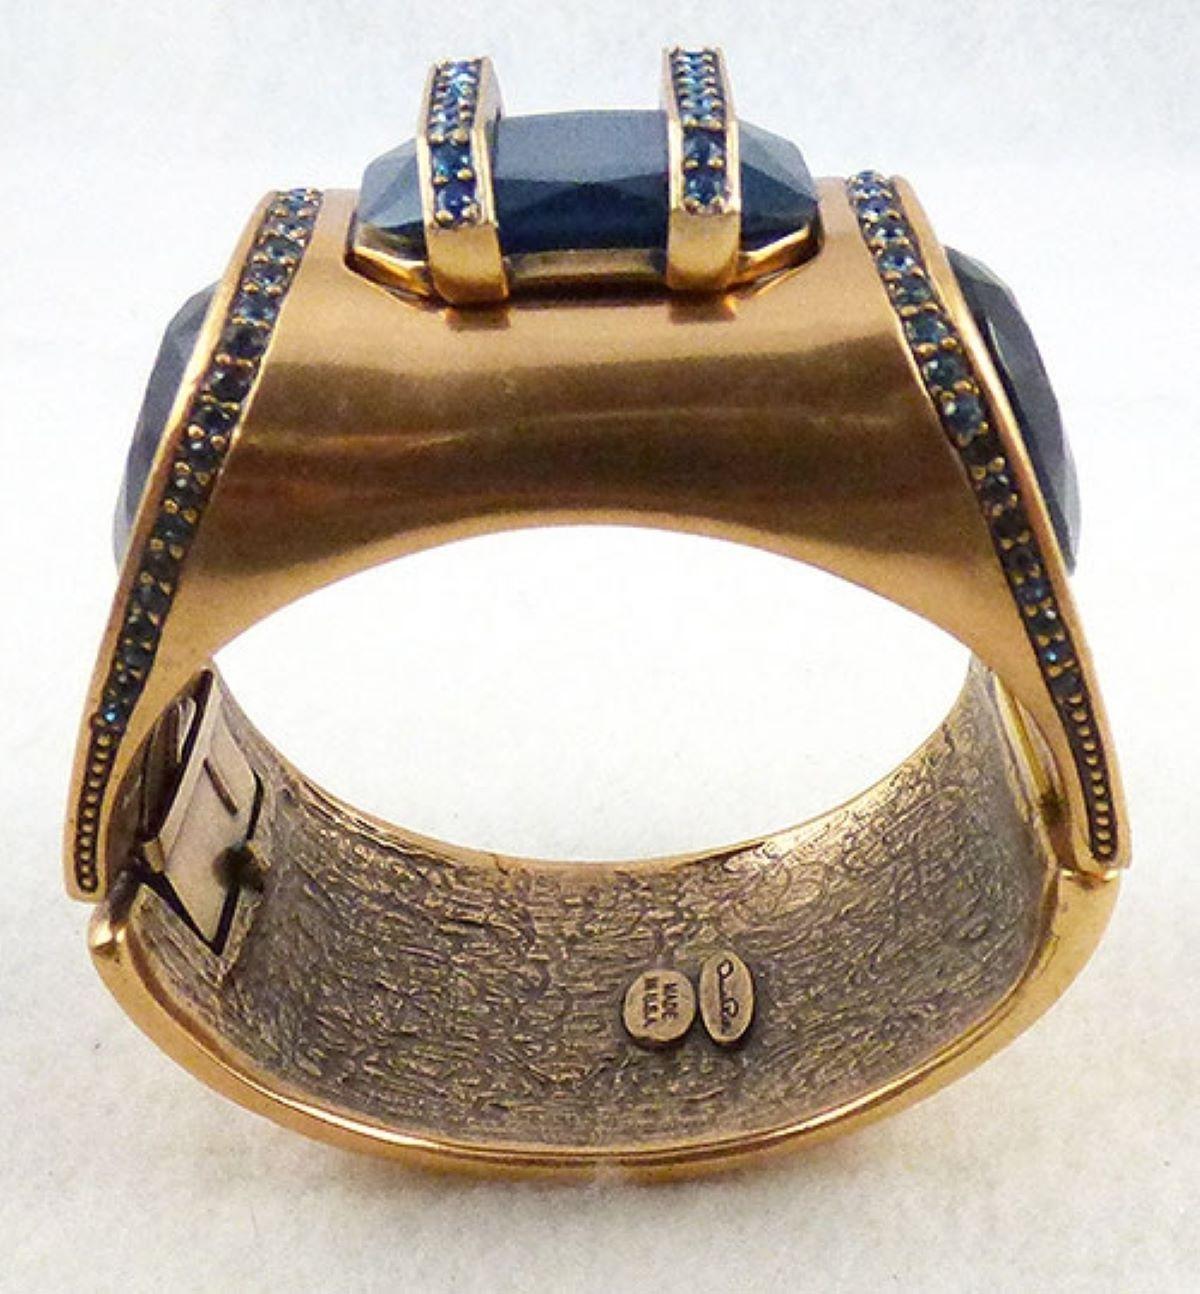 Designer Signed Oscar de La Renta Modern Sculptural hinged Cuff Bracelet.  Outstanding unique design. The top is set with a navy blue octagonal resin stone, the flat sides set with huge navy resin teardrop stones. Two bars set with navy crystals